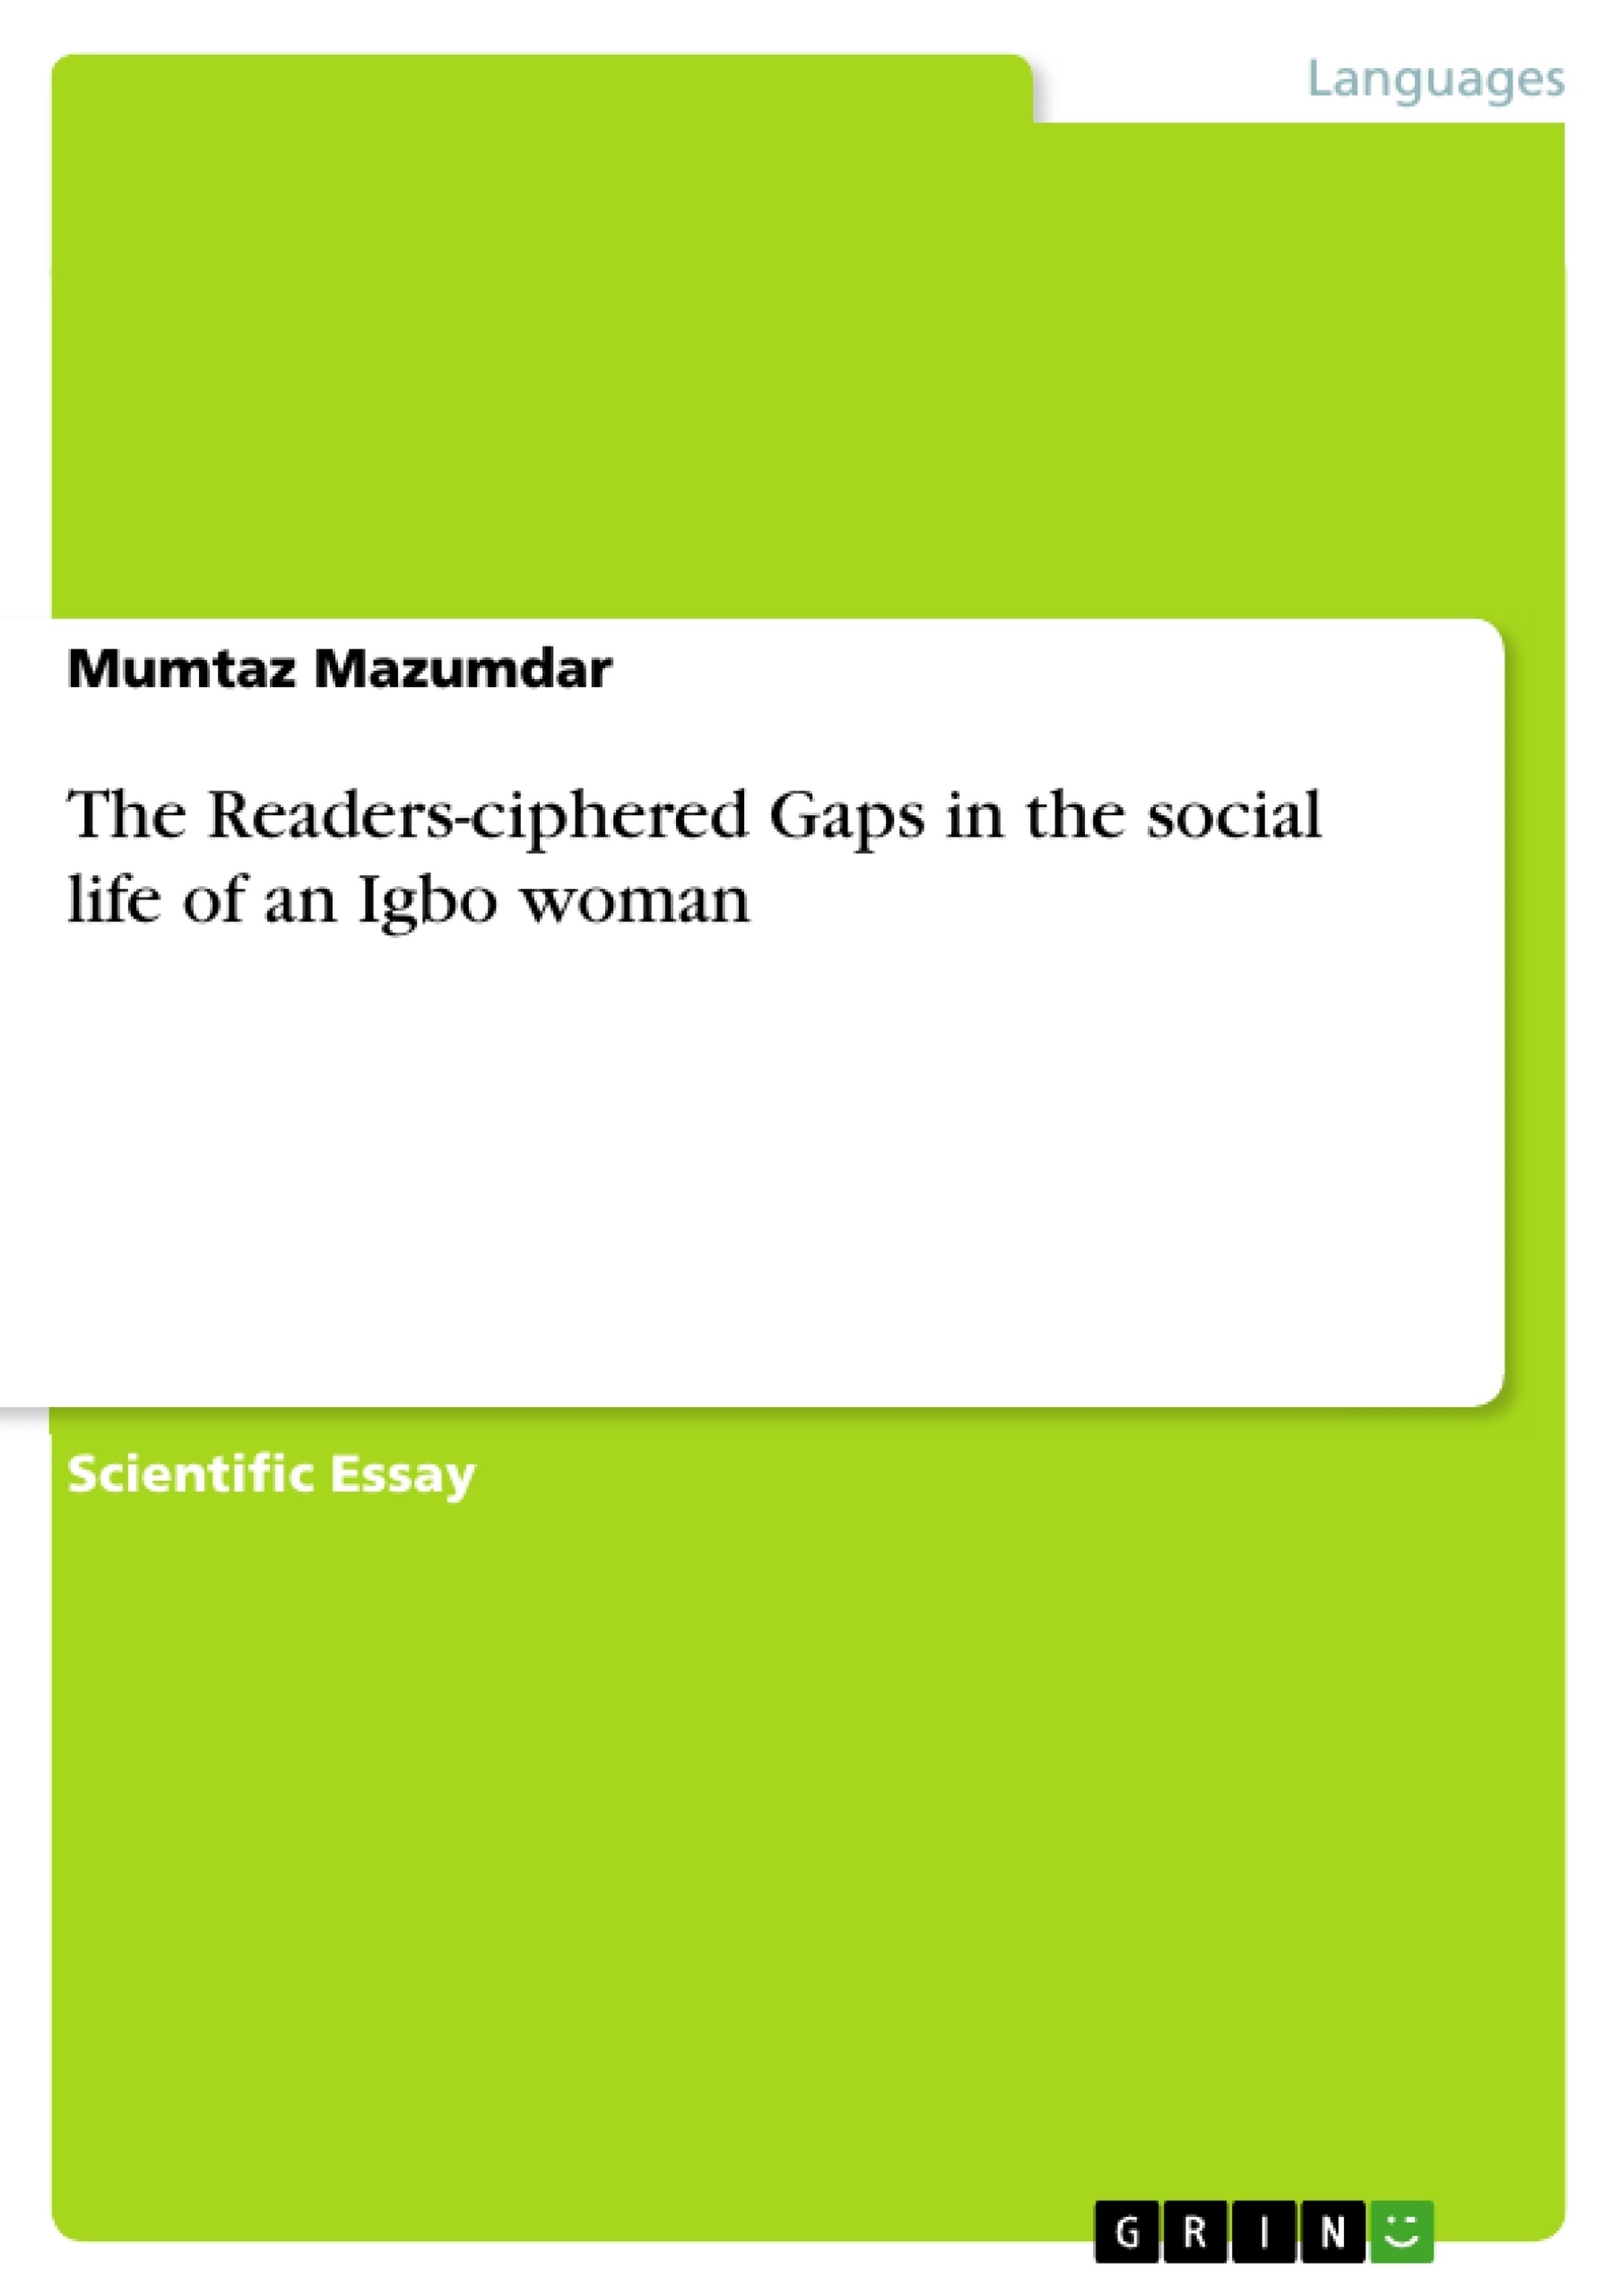 Titel: The Readers-ciphered Gaps in the social life of an Igbo woman